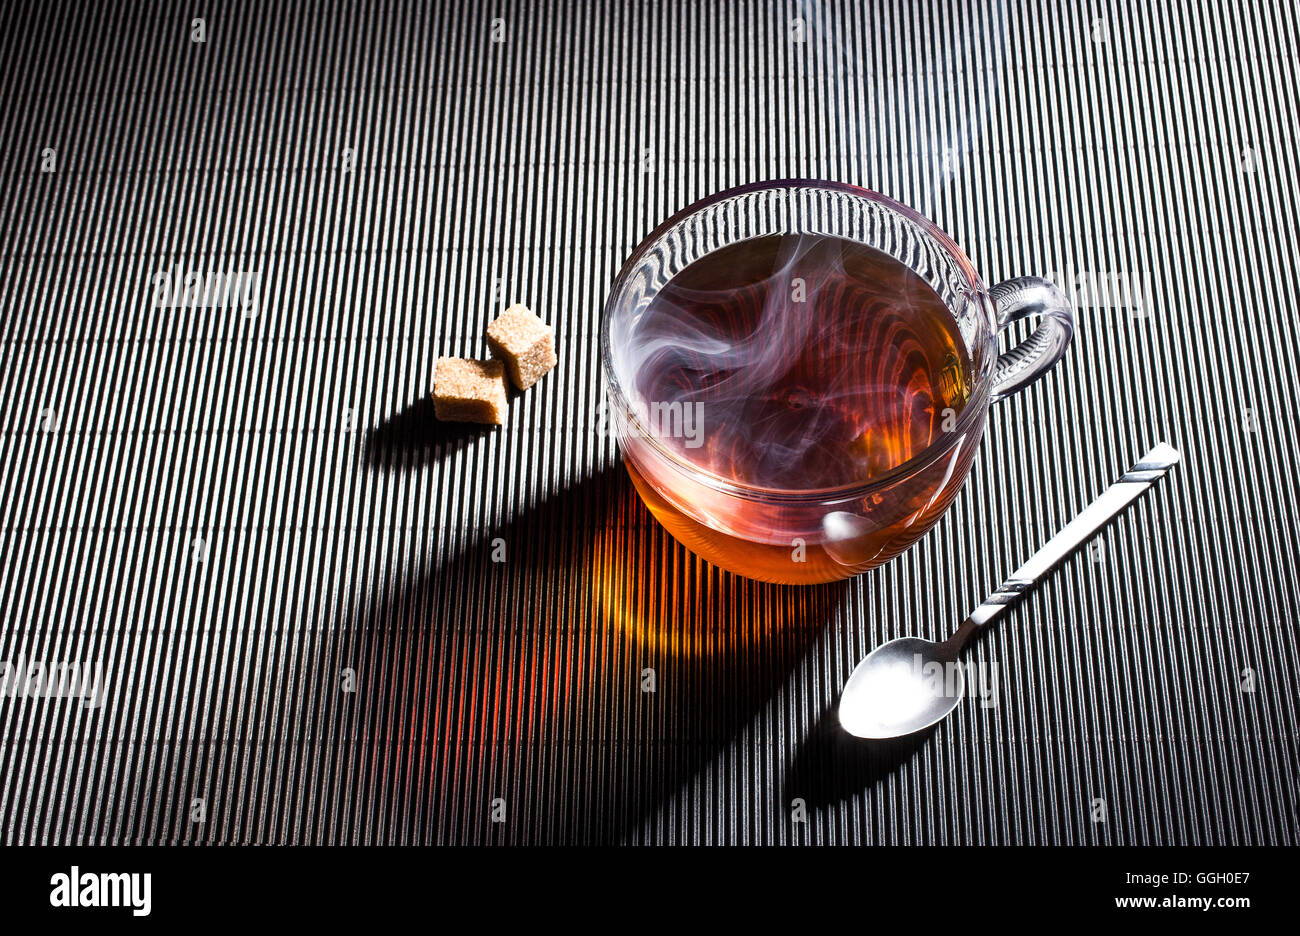 teacup with the reflection of the background structure. Stock Photo